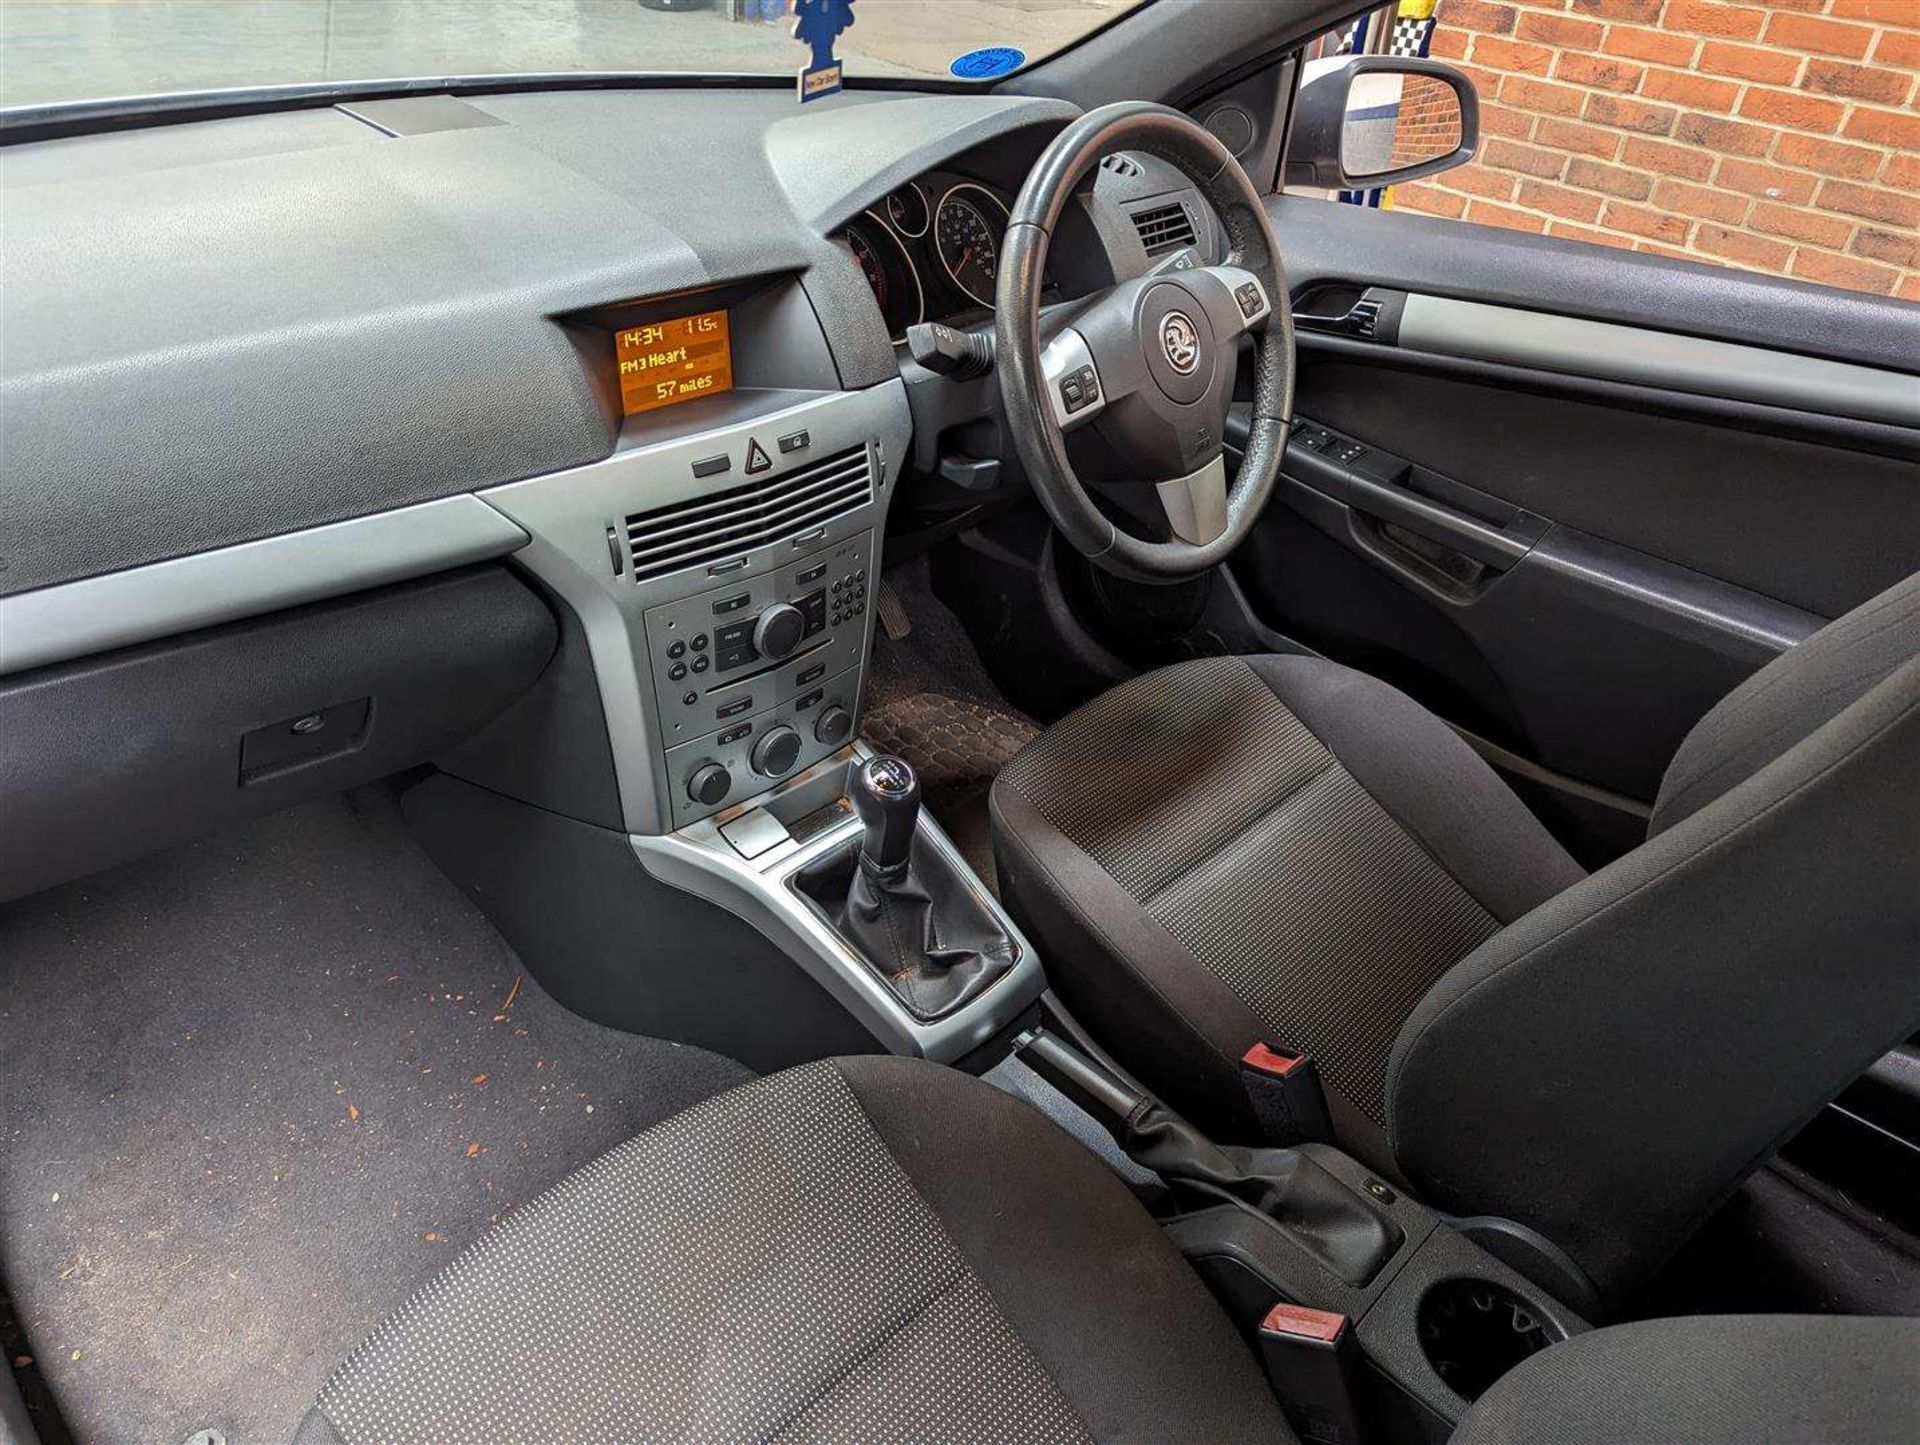 2009 VAUXHALL ASTRA TWINTOP SPORT - Image 11 of 30